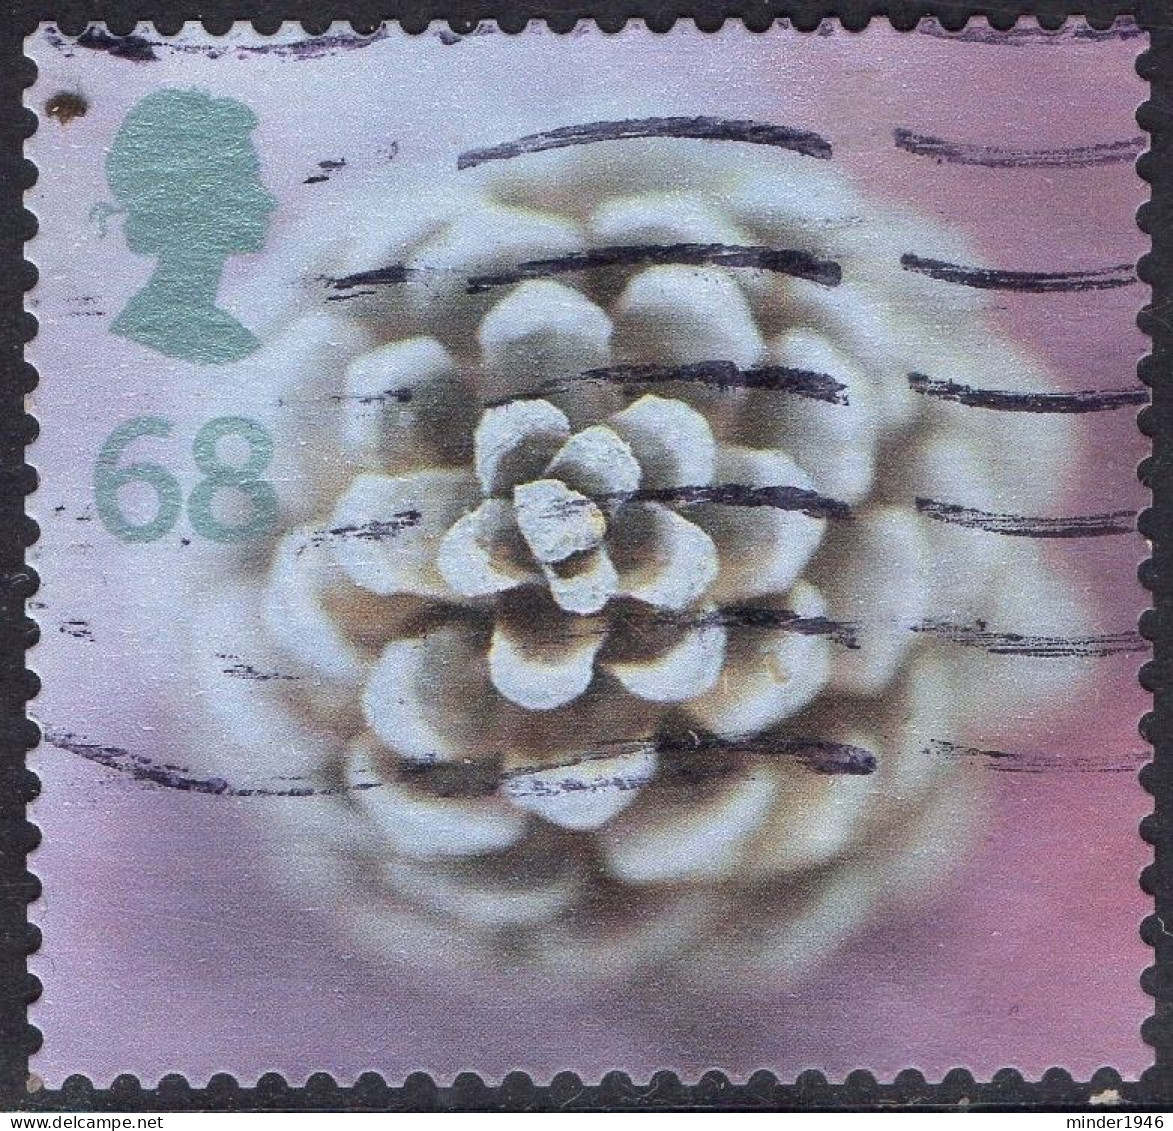 GREAT BRITAIN 2002 QEII 68p Multicoloured Christmas-Pine Cone SG2325 FU - Used Stamps